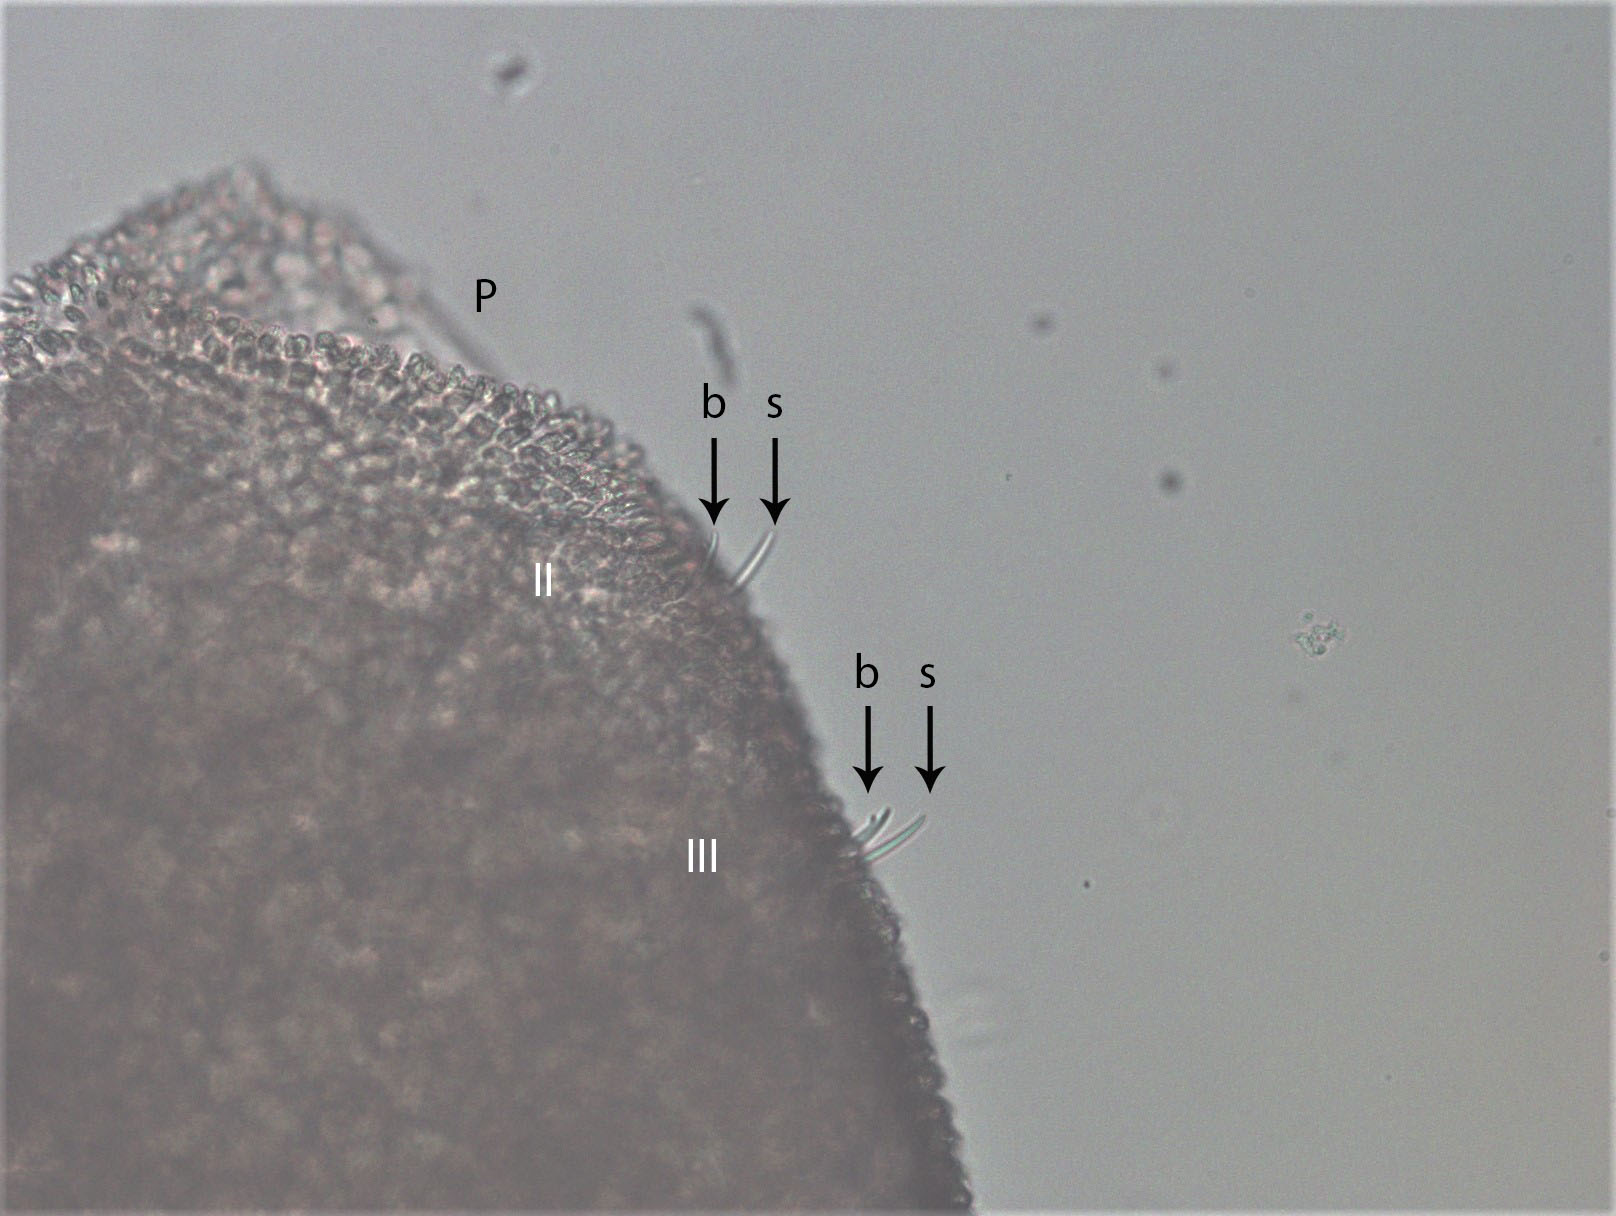 A microscope photo of a worm showing the first few segments of the worm, including a retracted prostomium labelled P, and the ventral chaetae in the first two segments, labelled "II" and "III." The body wall is covered in little speckles that completely cover the surface, making it slightly opaque. There are arrows pointing to four chaetae, two of which are bifid and labelled "b," and two are simple-pointed and labelled "s."